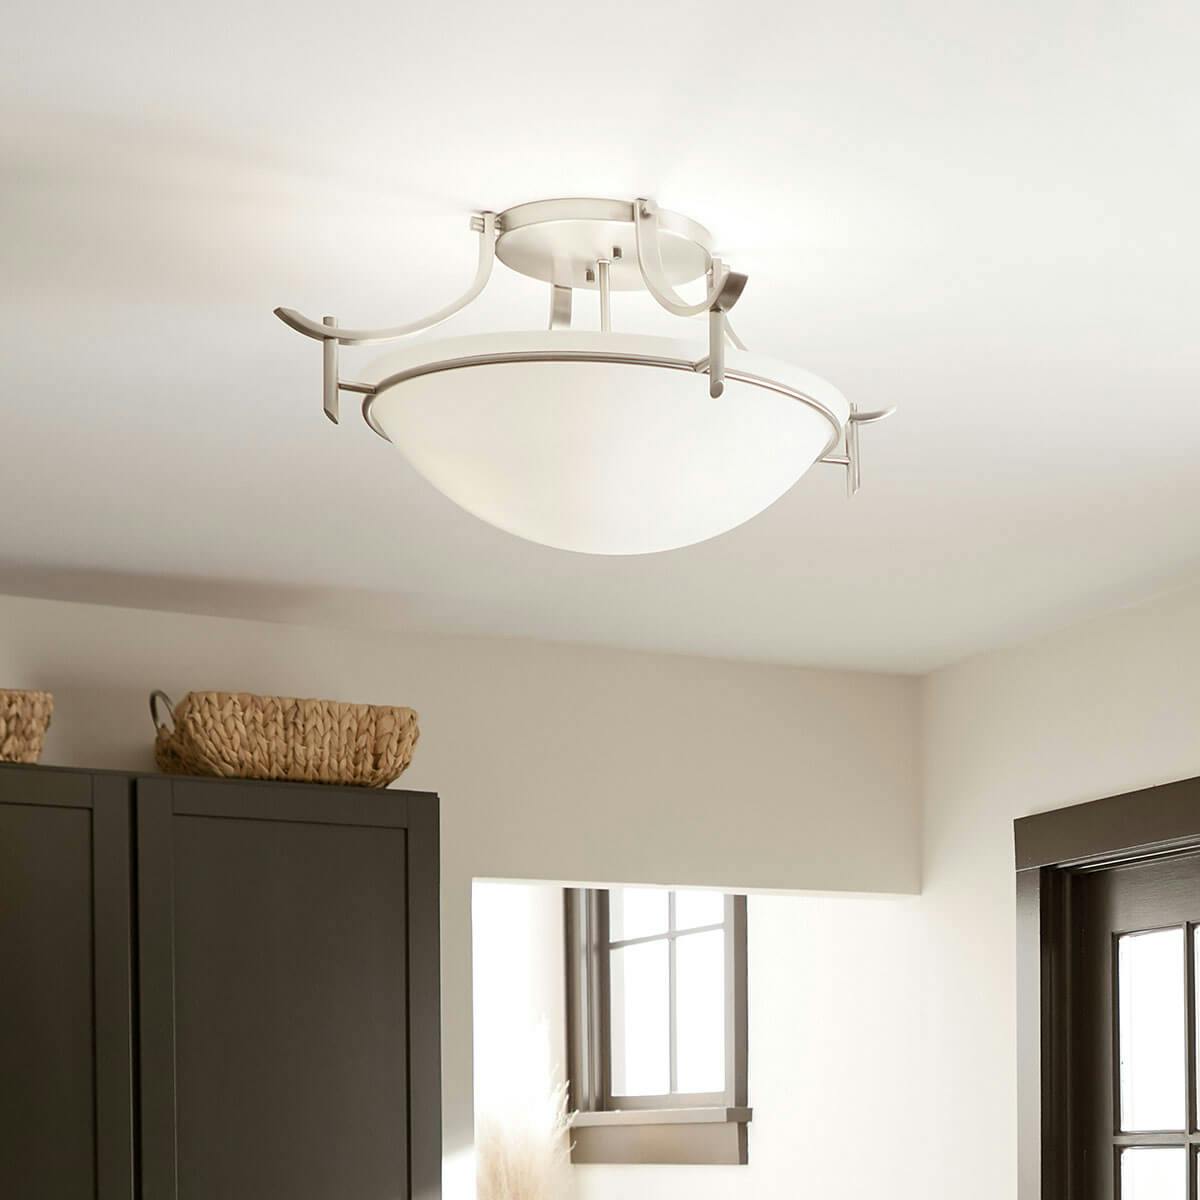 Day time mudroom image featuring Olympia flush mount light 3606AP